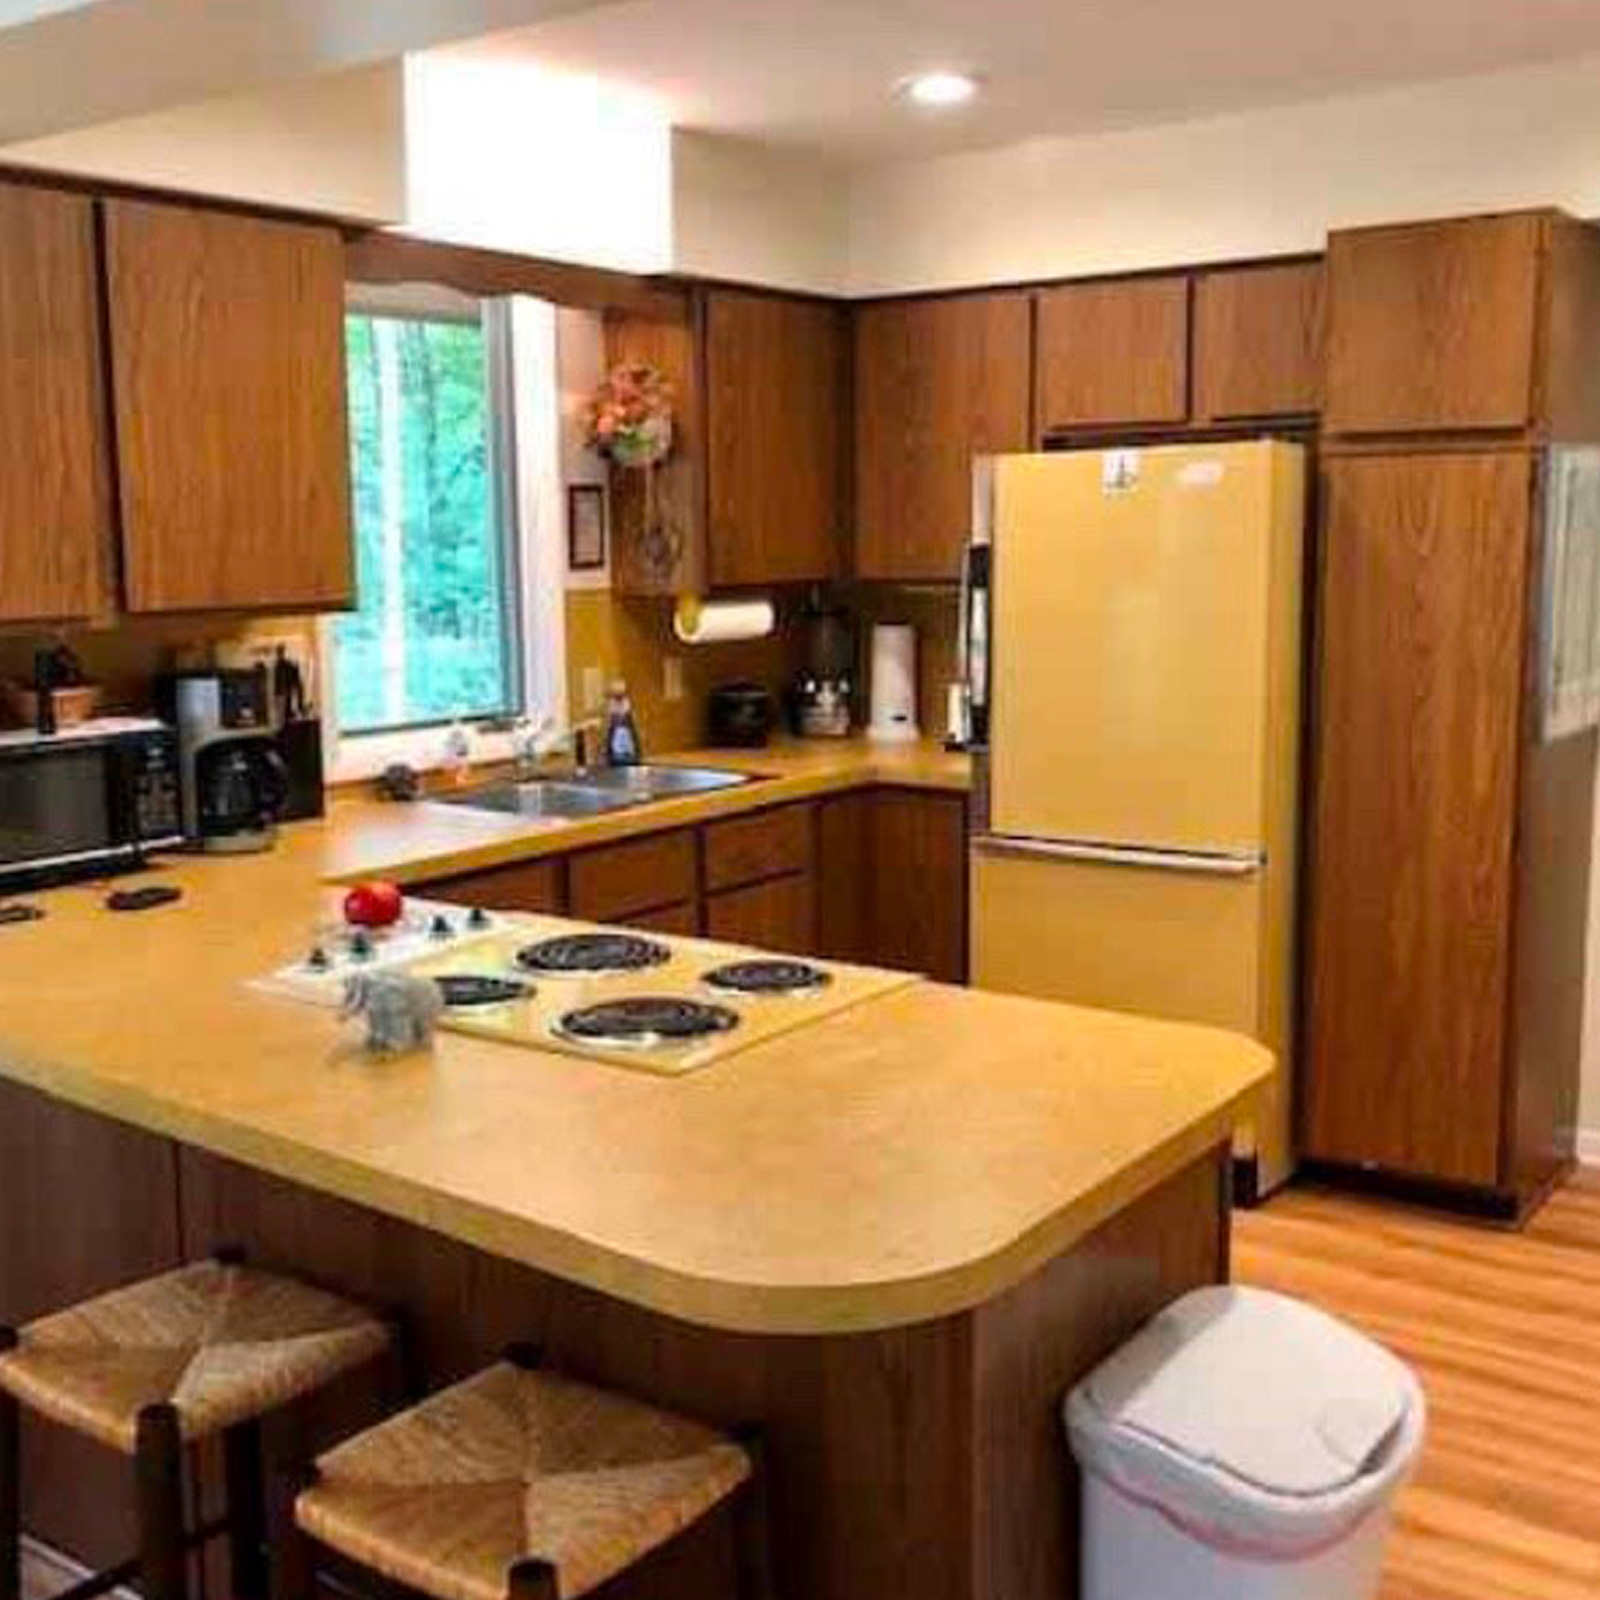 Entry 25 - This kitchen is in need of some new, modern cabinetry!